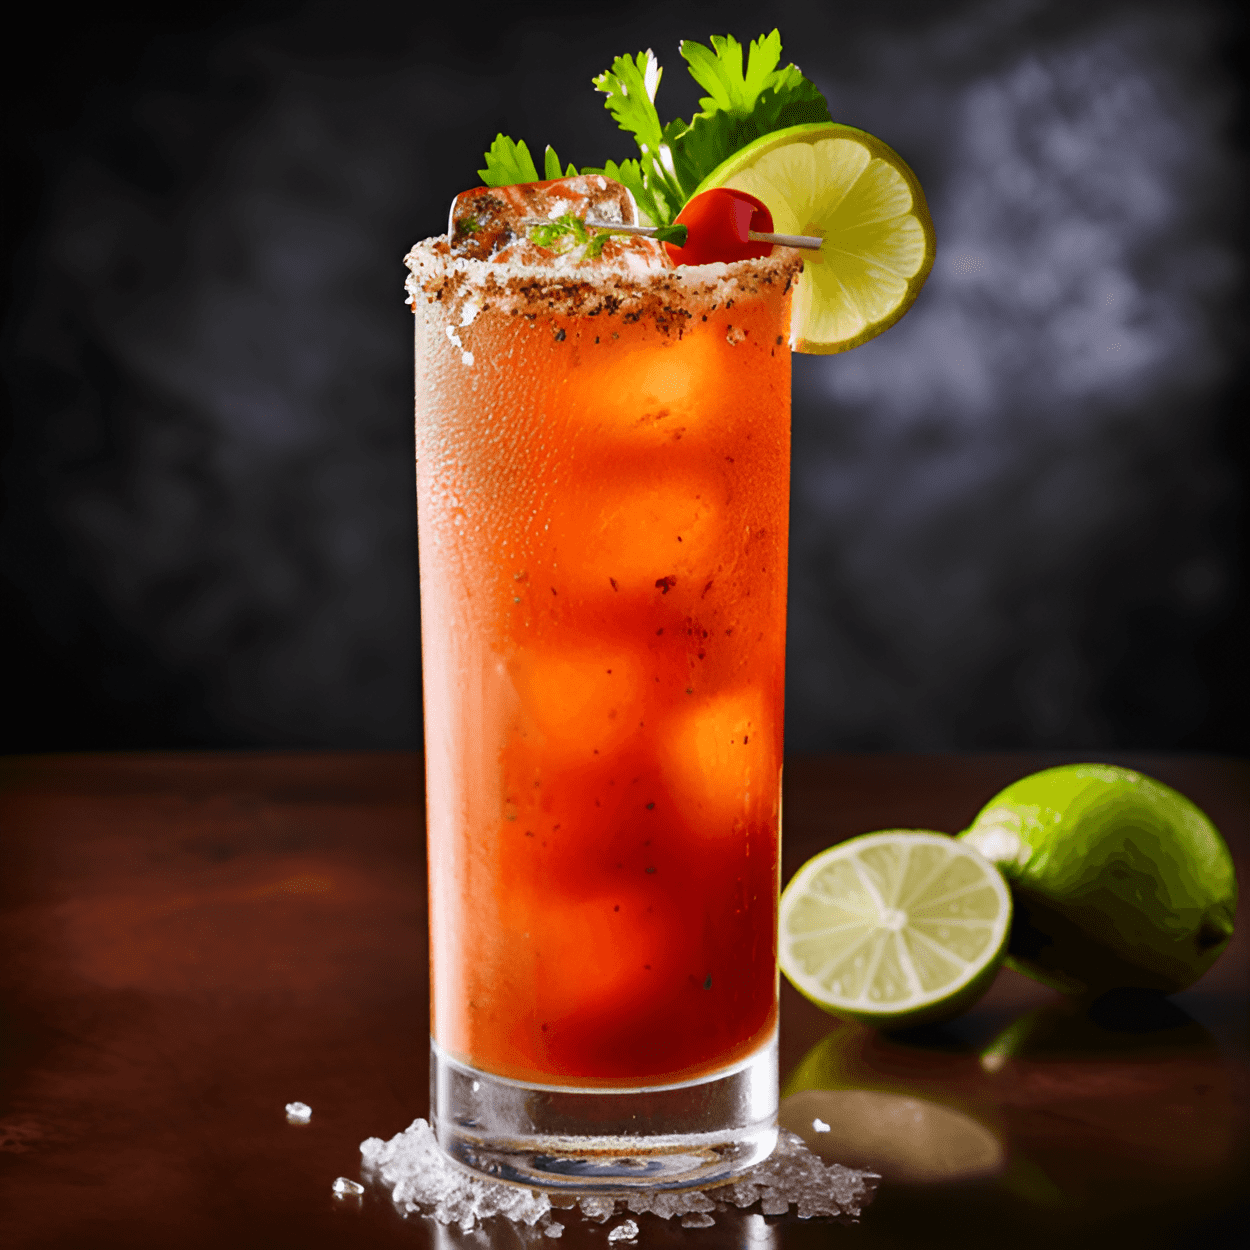 Cajun Mary Cocktail Recipe - The Cajun Mary is a spicy, savory, and tangy cocktail. The heat from the Cajun seasoning and hot sauce is balanced by the acidity of the tomato juice and the lime. The vodka adds a smooth, strong kick.